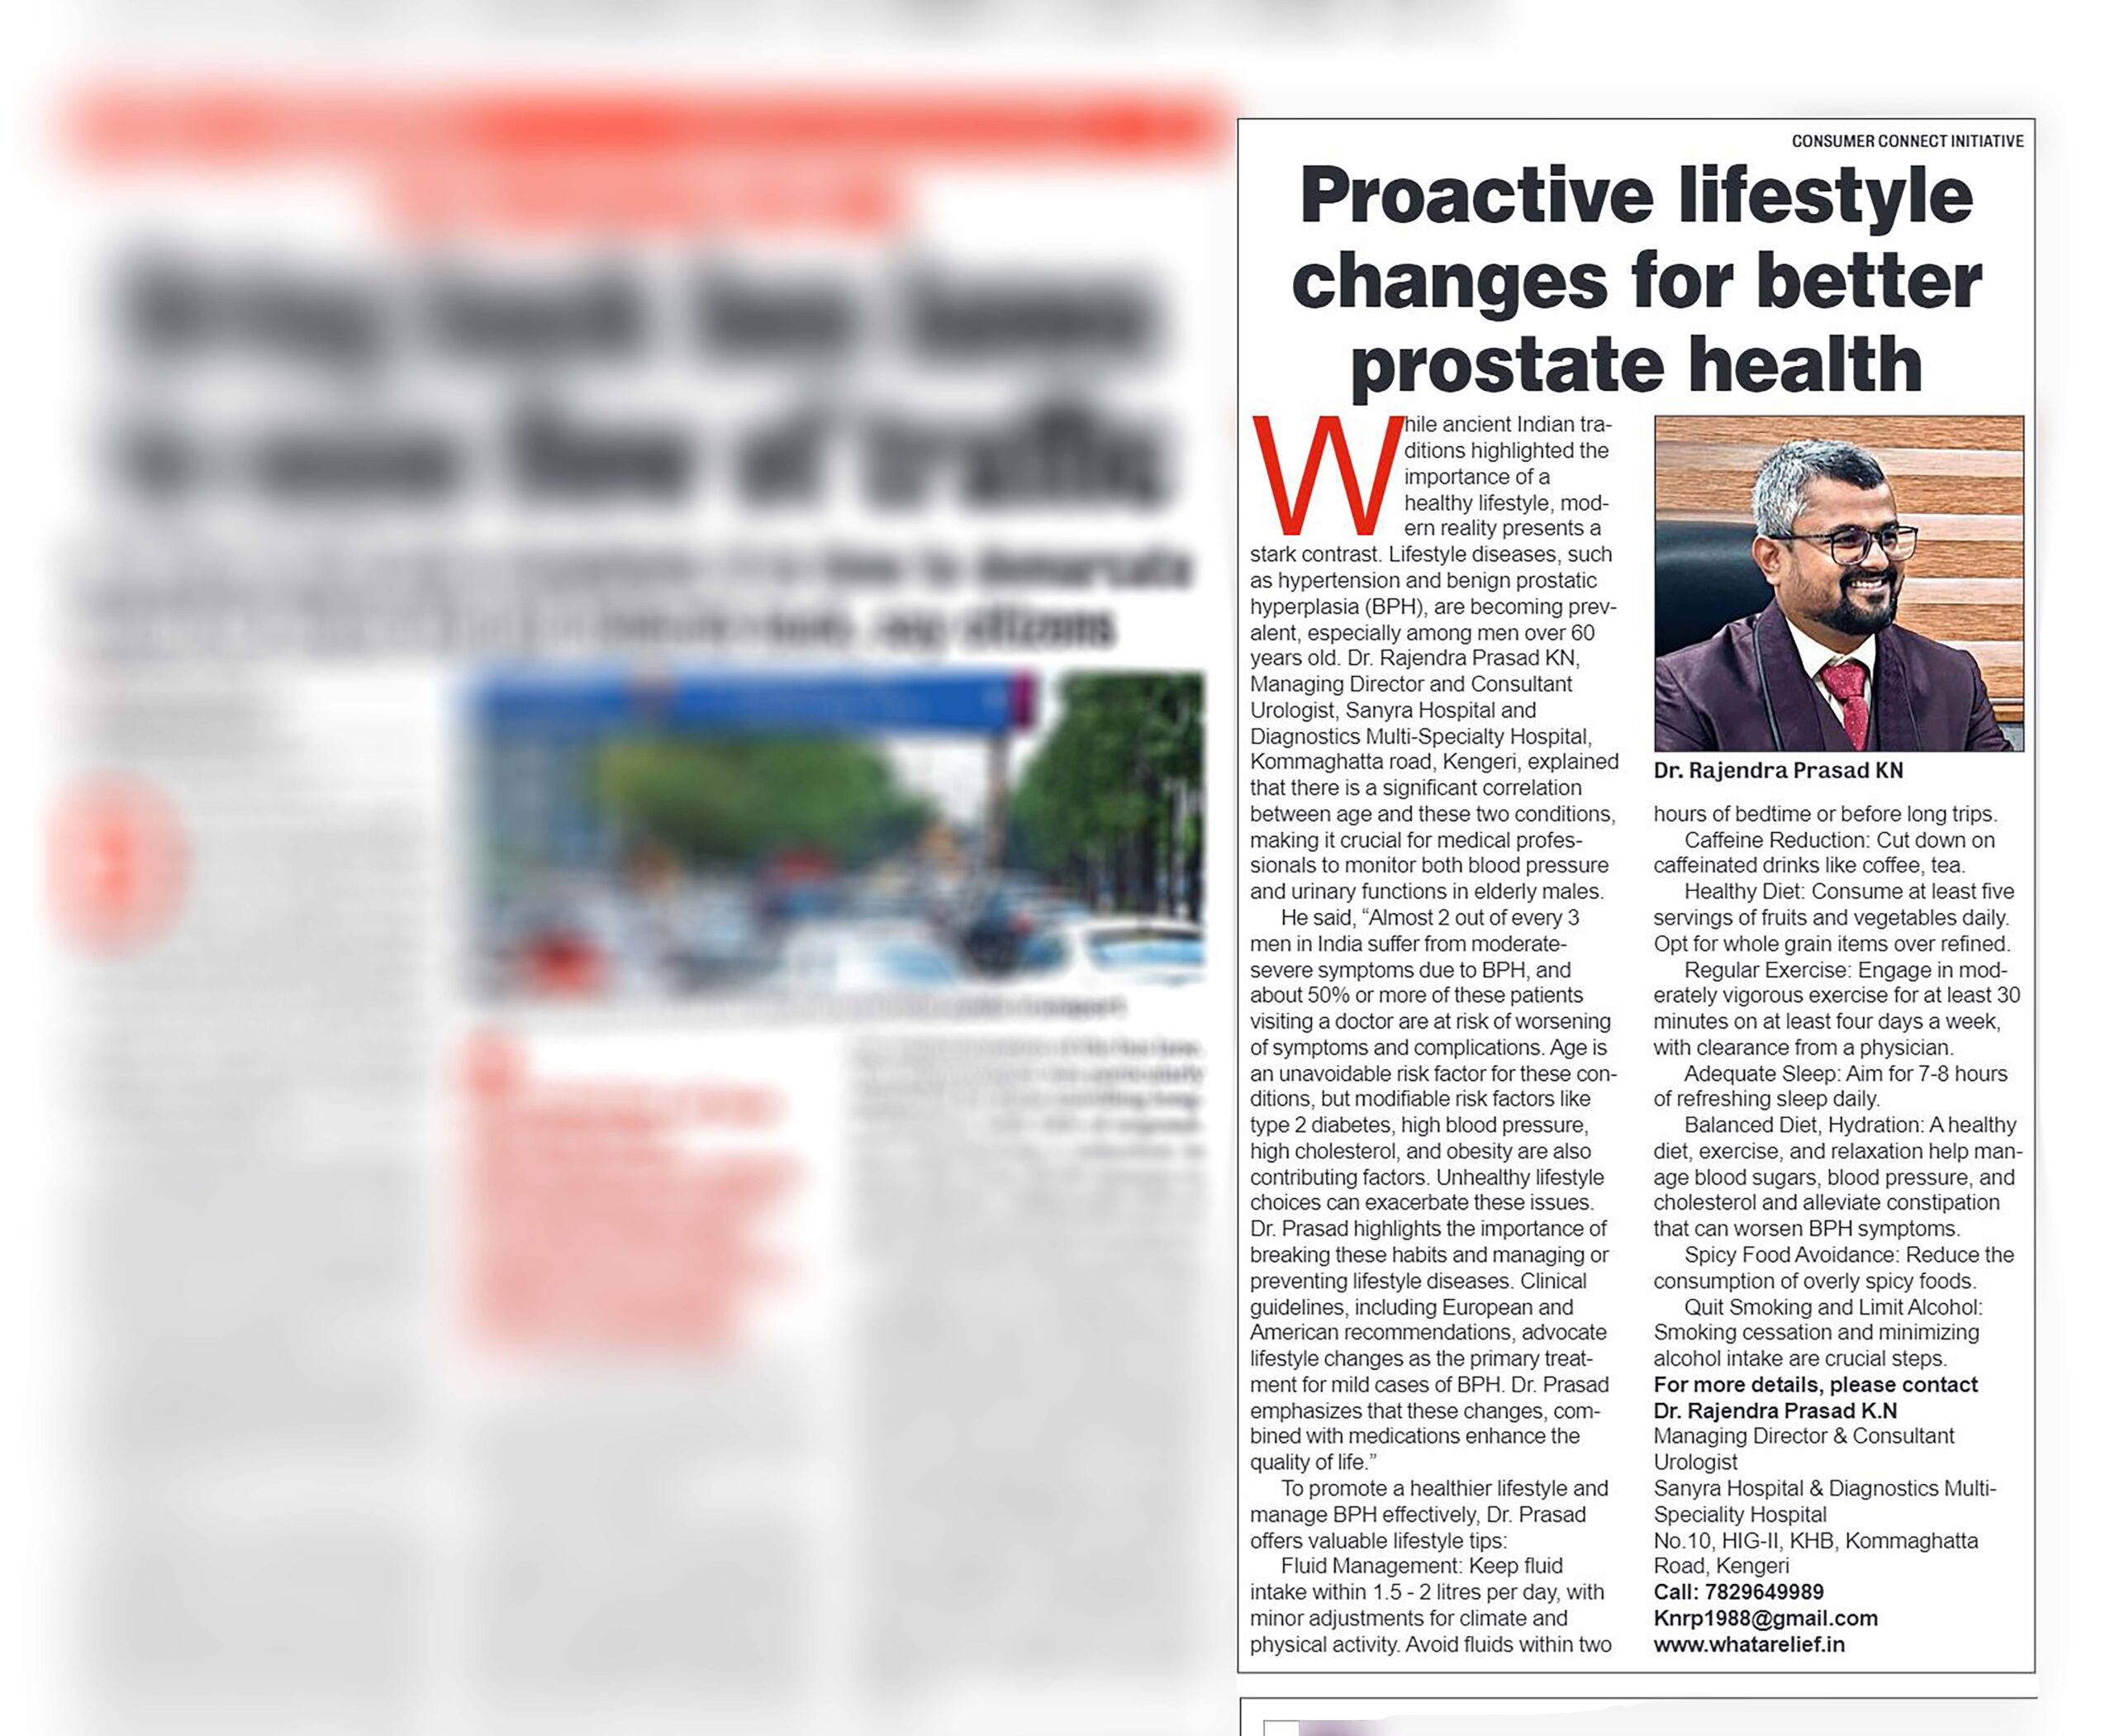 Published on BangaloreMirror : Proactive Lifestyle Changes for Better Prostate Health